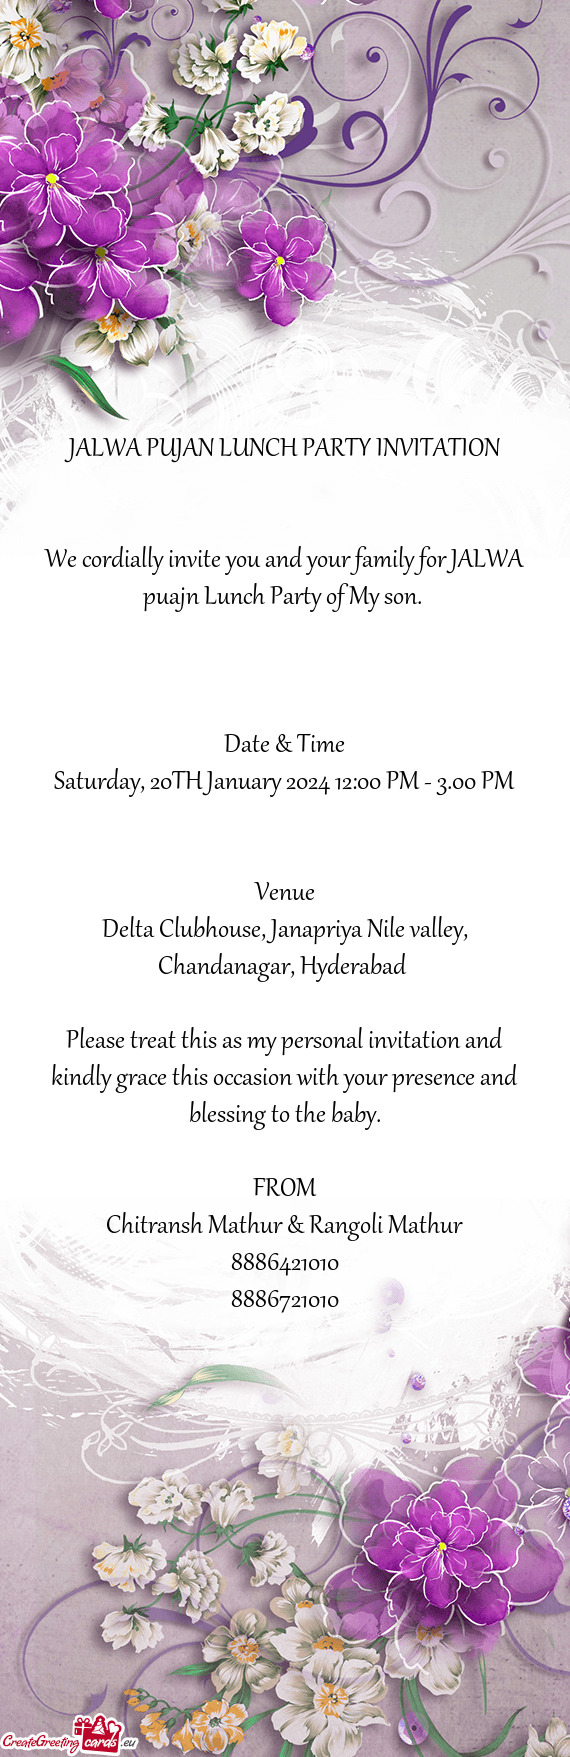 JALWA PUJAN LUNCH PARTY INVITATION